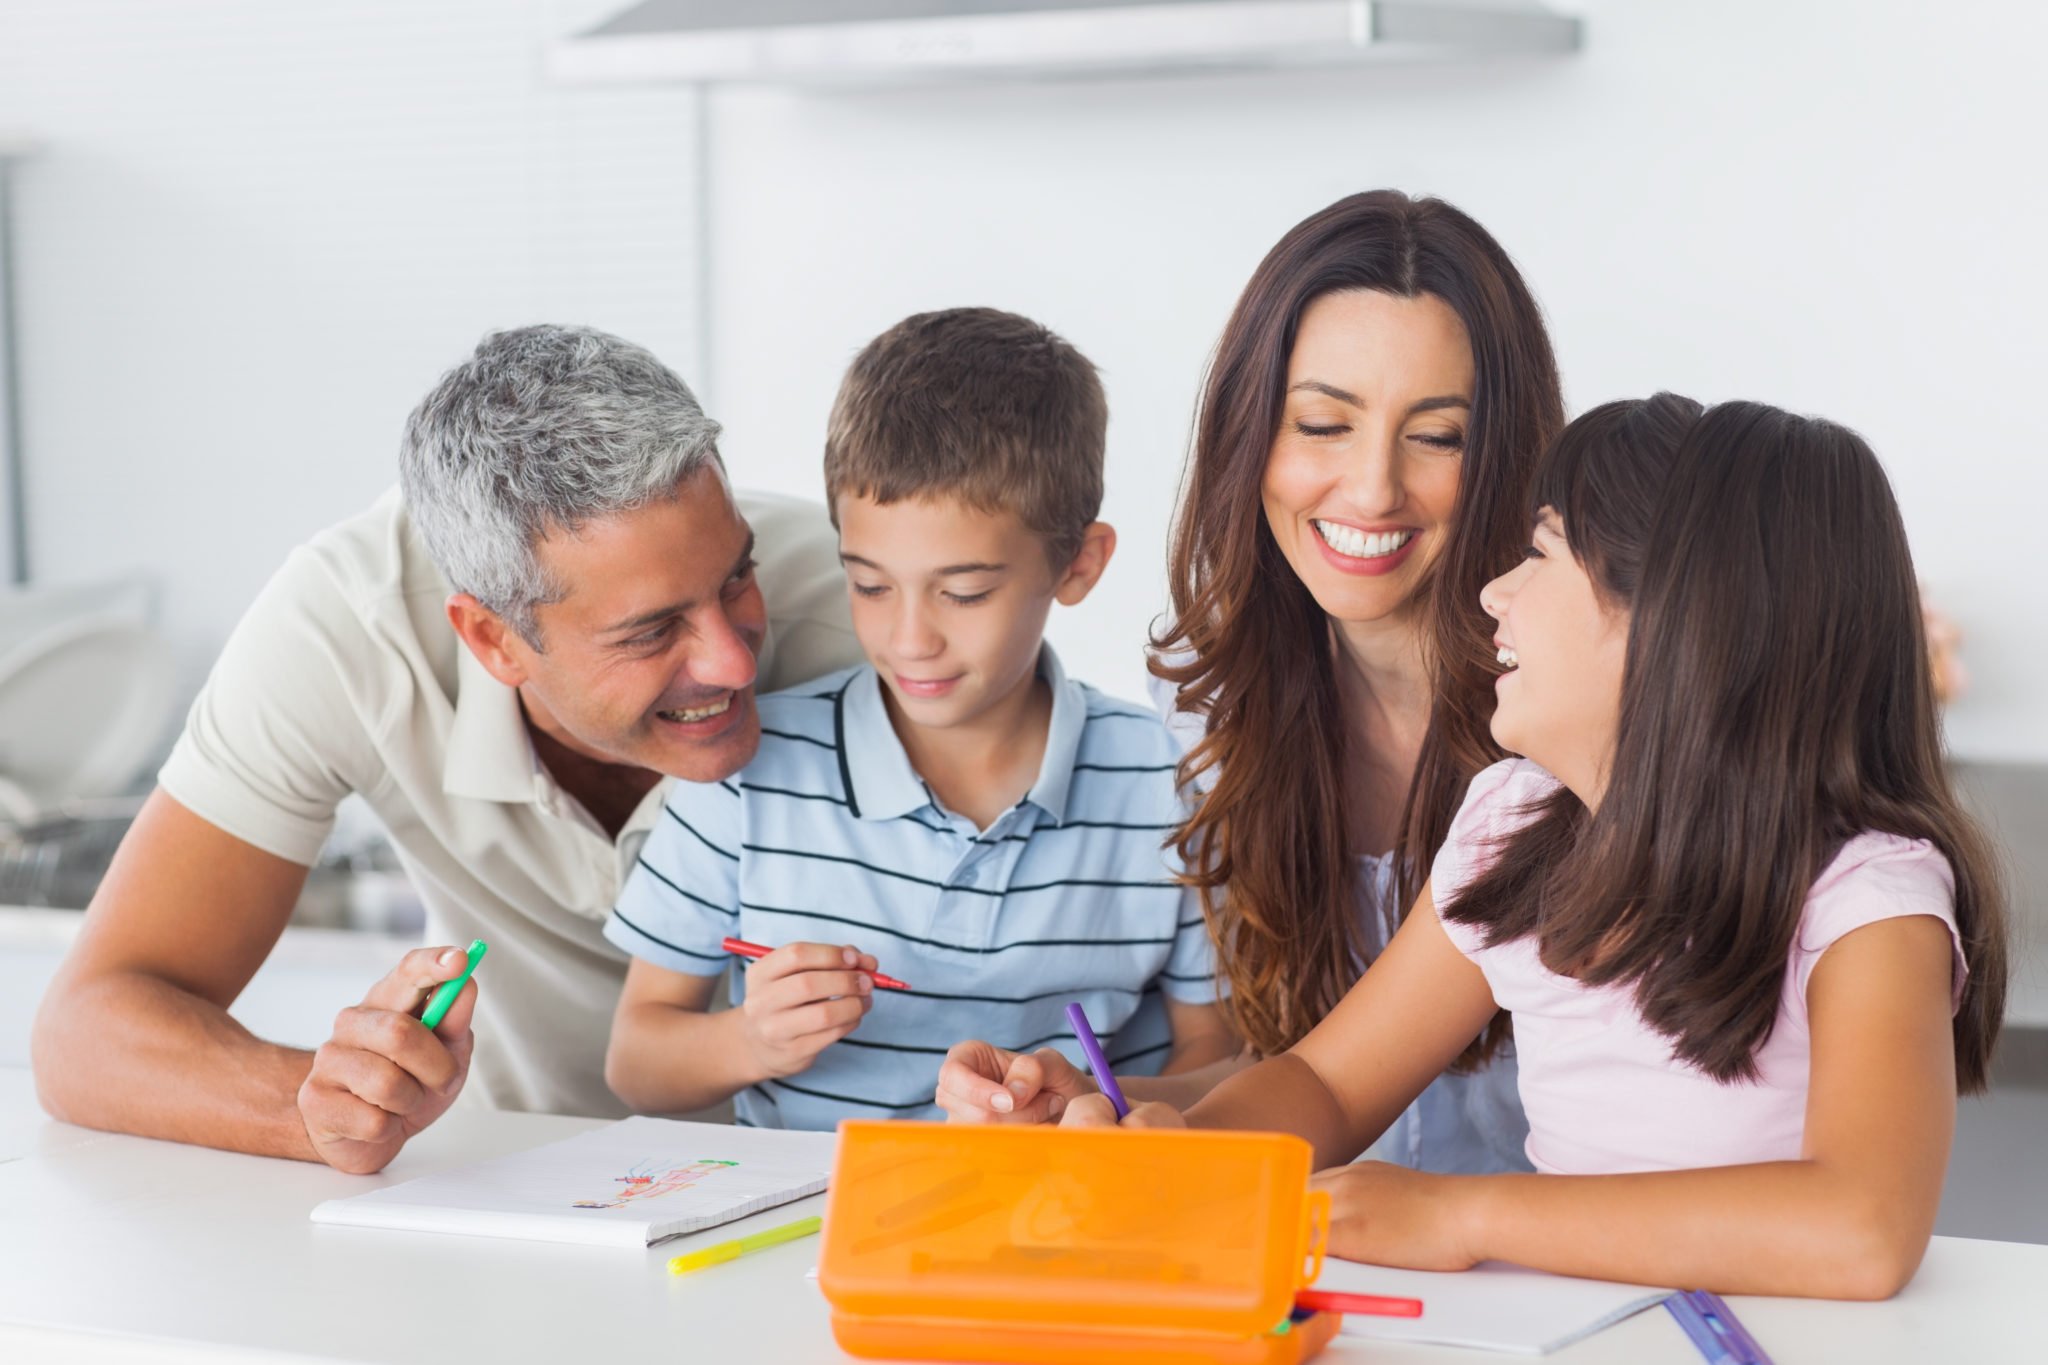 Smiling family drawing together in kitchen